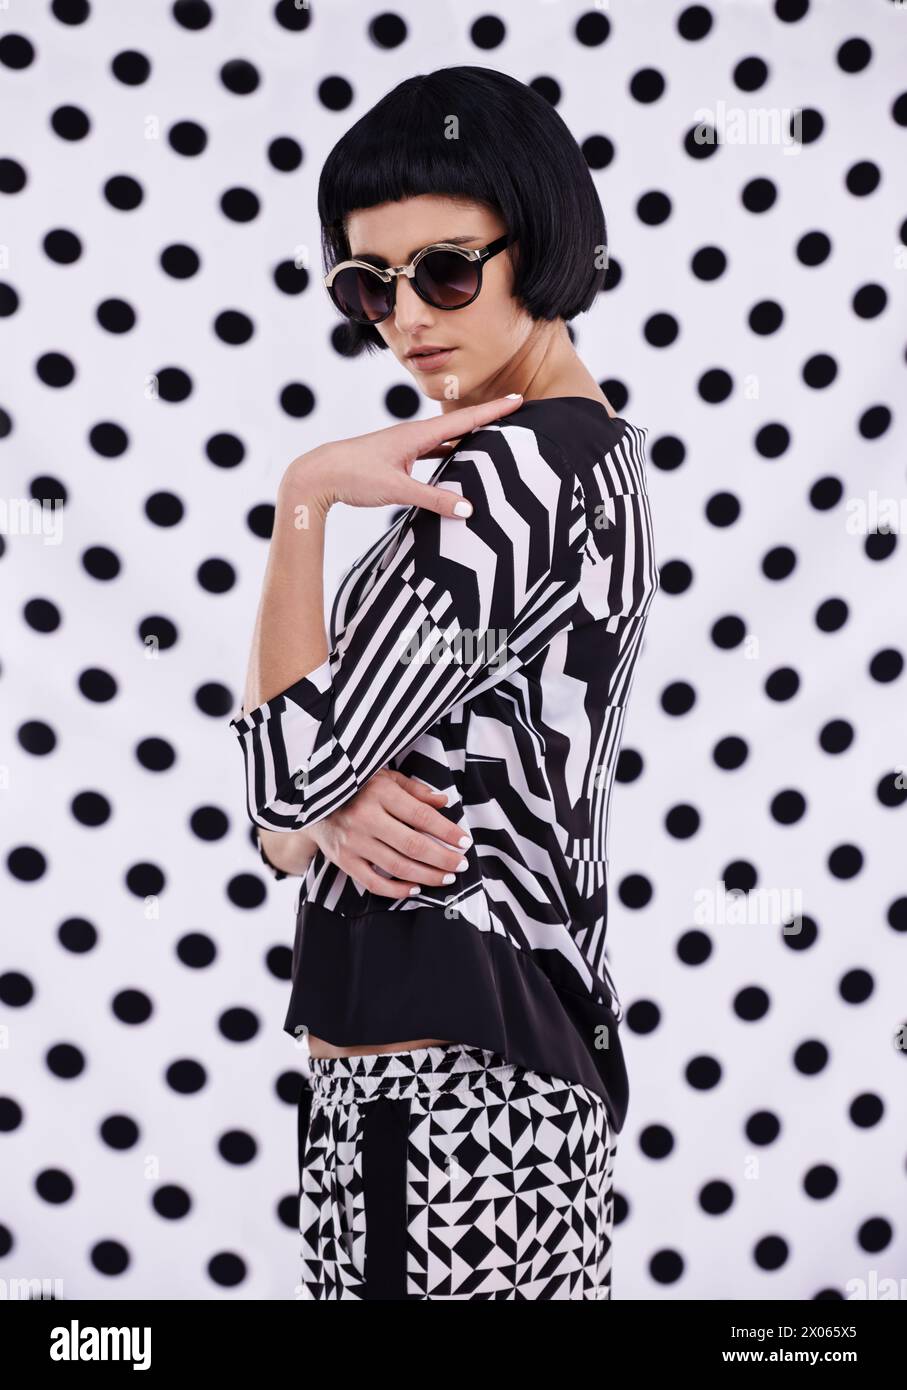 Fashion, retro or woman on polka dot or white background in trendy stylish outfit or vintage sunglasses. Unique, monochrome and confident female model Stock Photo